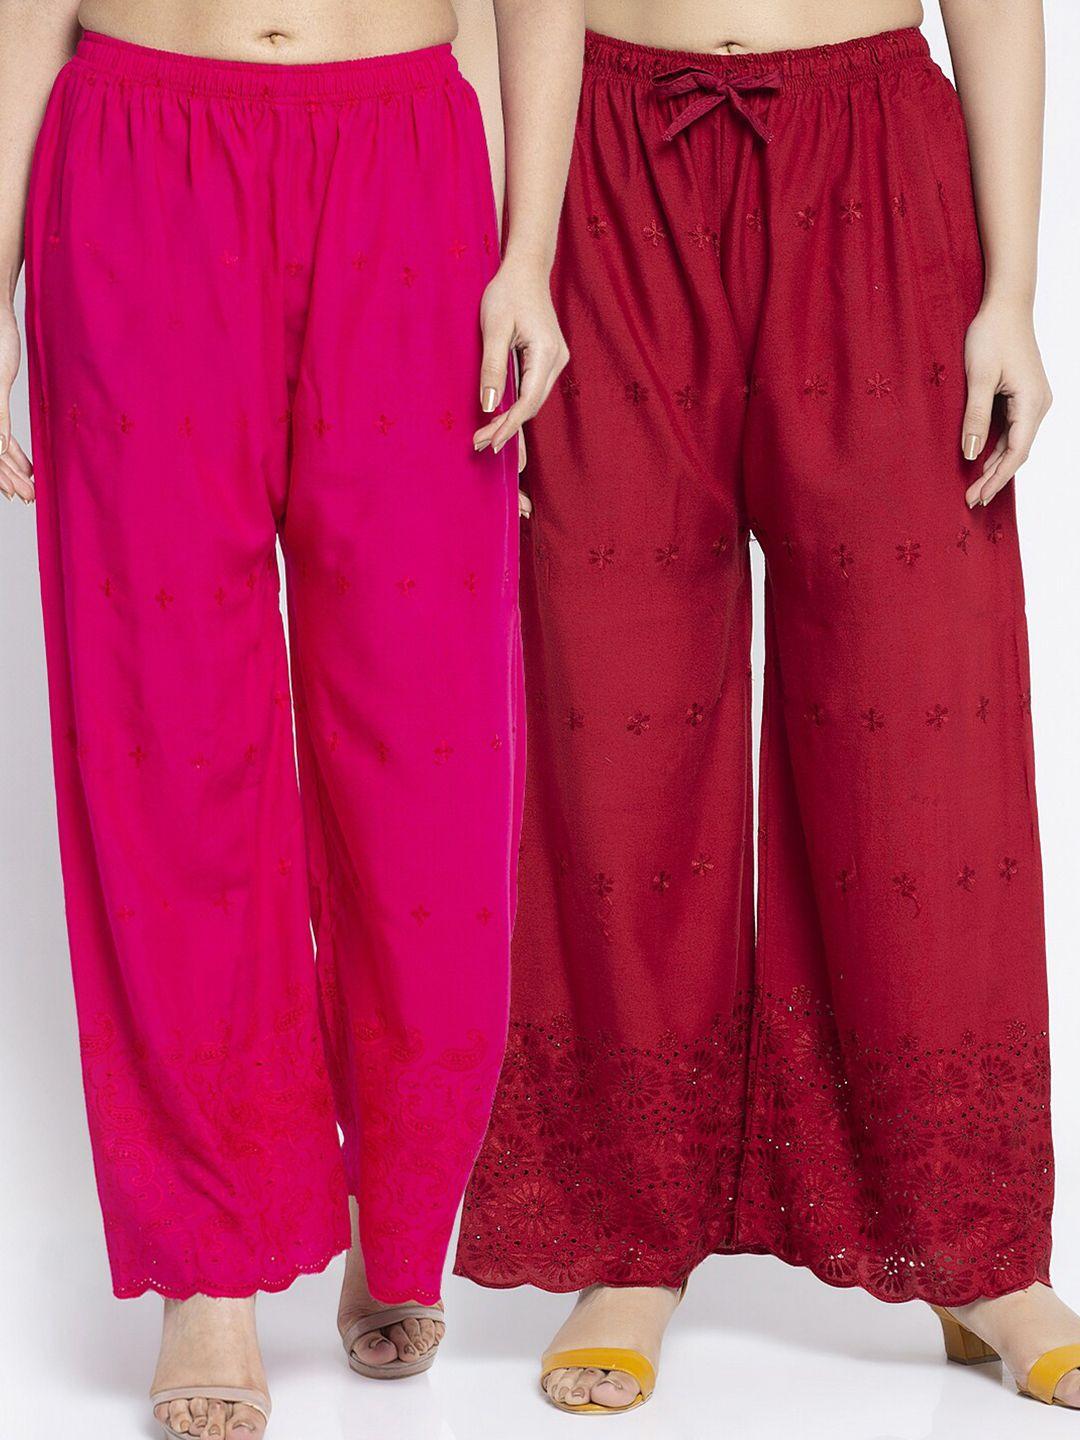 jinfo women fuchsia & maroon set of 2 floral embroidered flared knitted ethnic palazzos